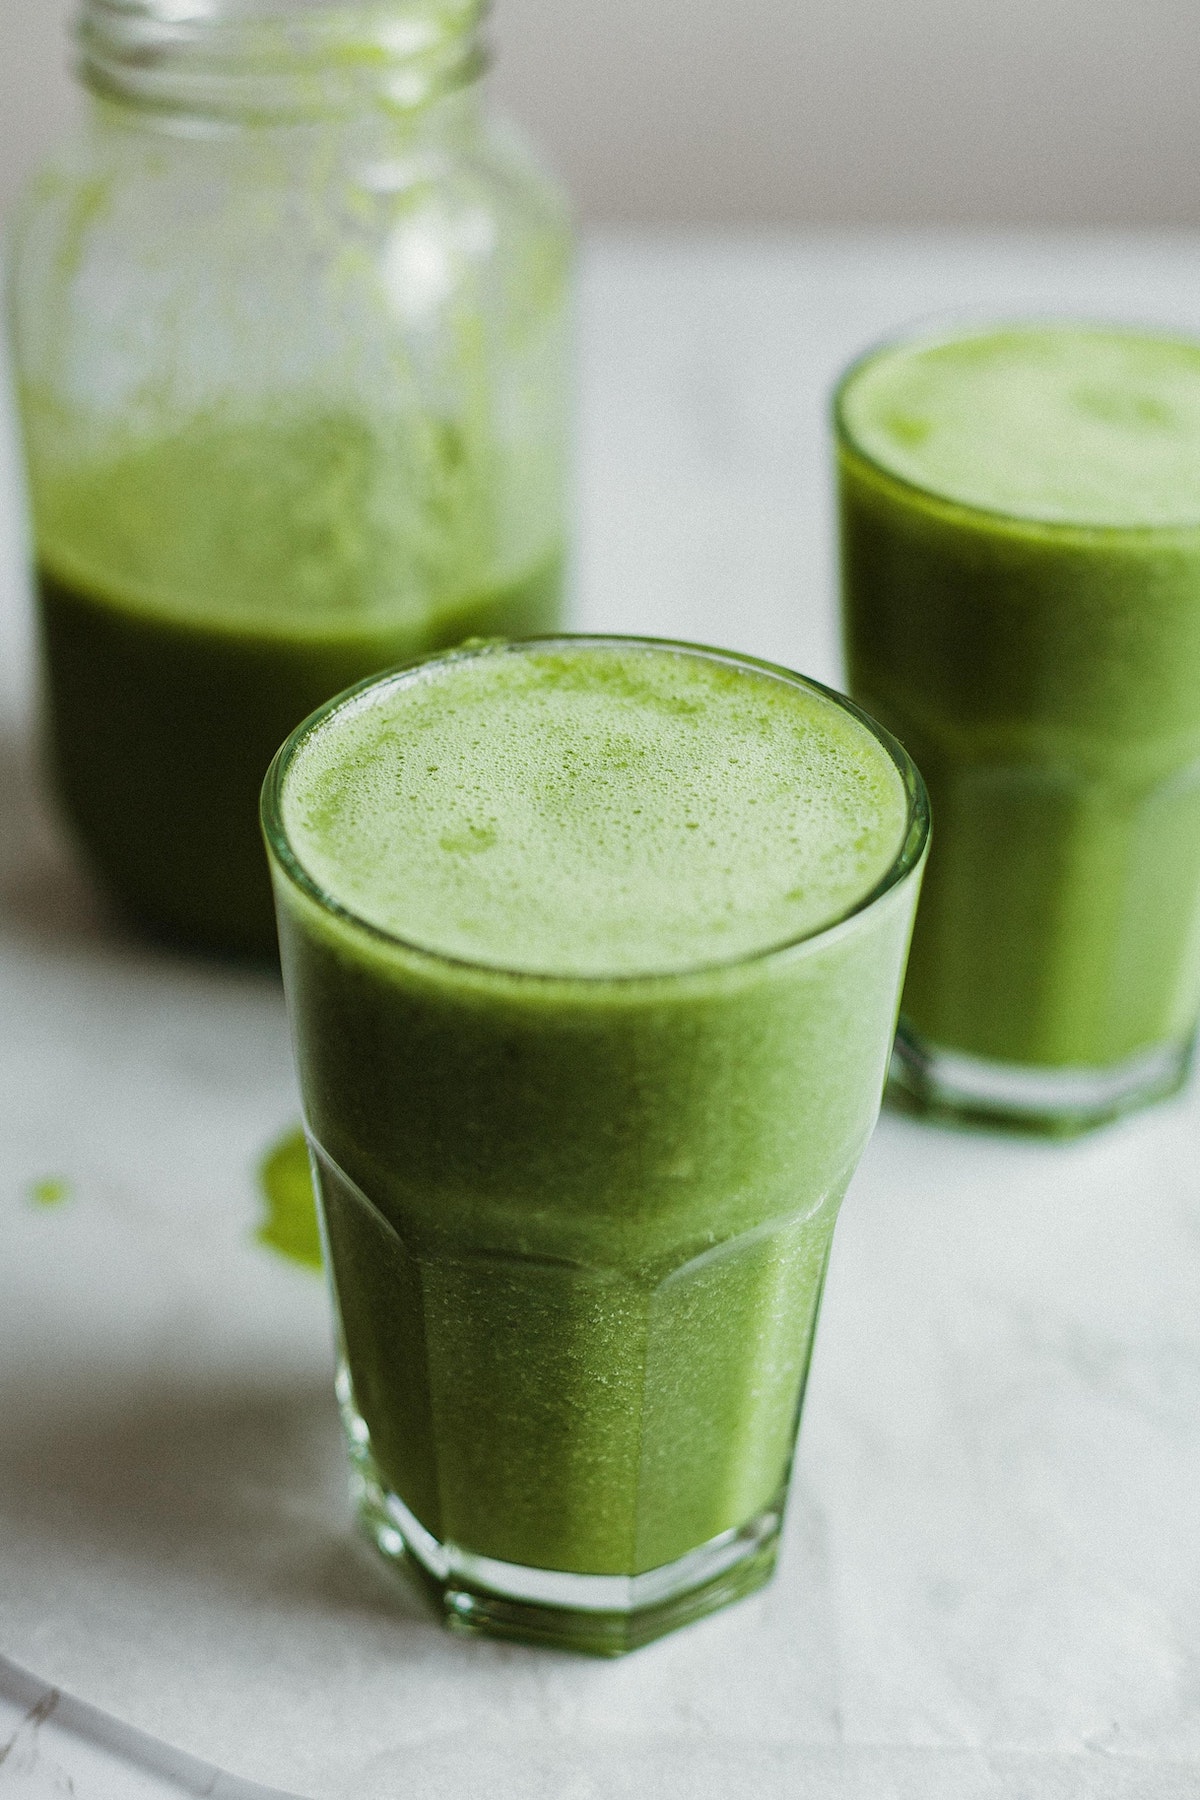 Two glasses of green juice with a larger jar of the juice in the background.